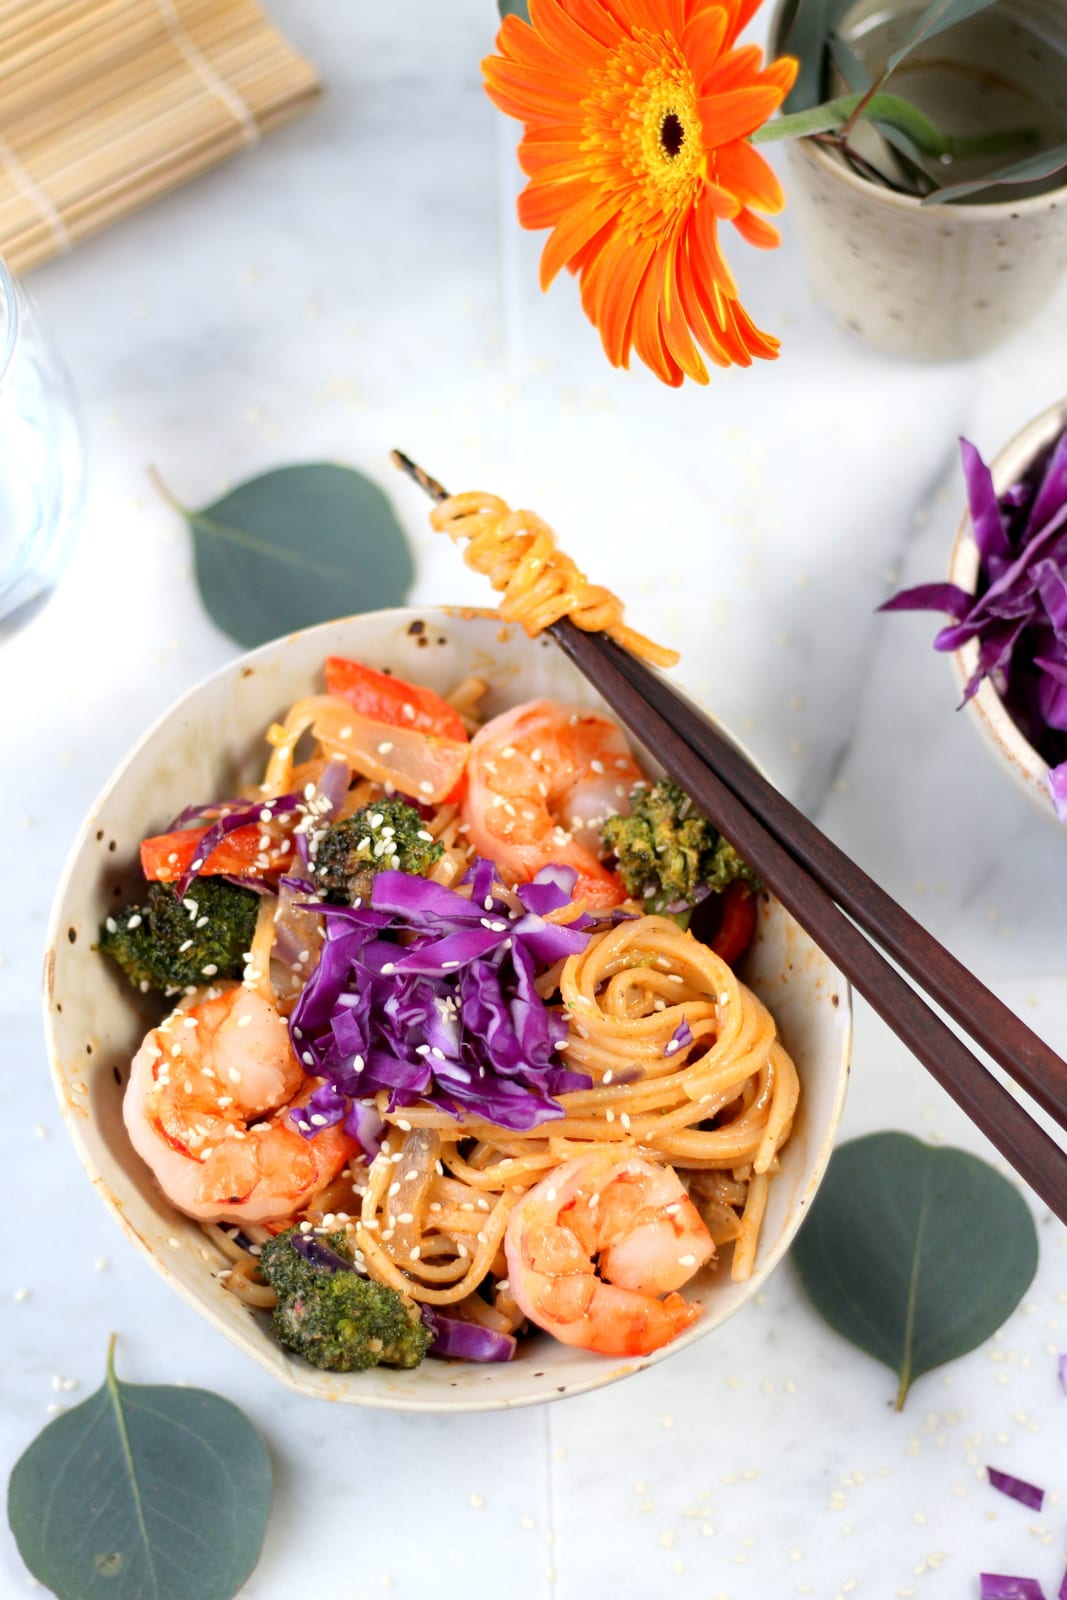 Sweet Curried Rice Noodles +Shrimp and Roasted Vegetables - amazing recipe for Bangkok Curry noodles. thewoodenskillet.com #foodphotograhy #foodstyling